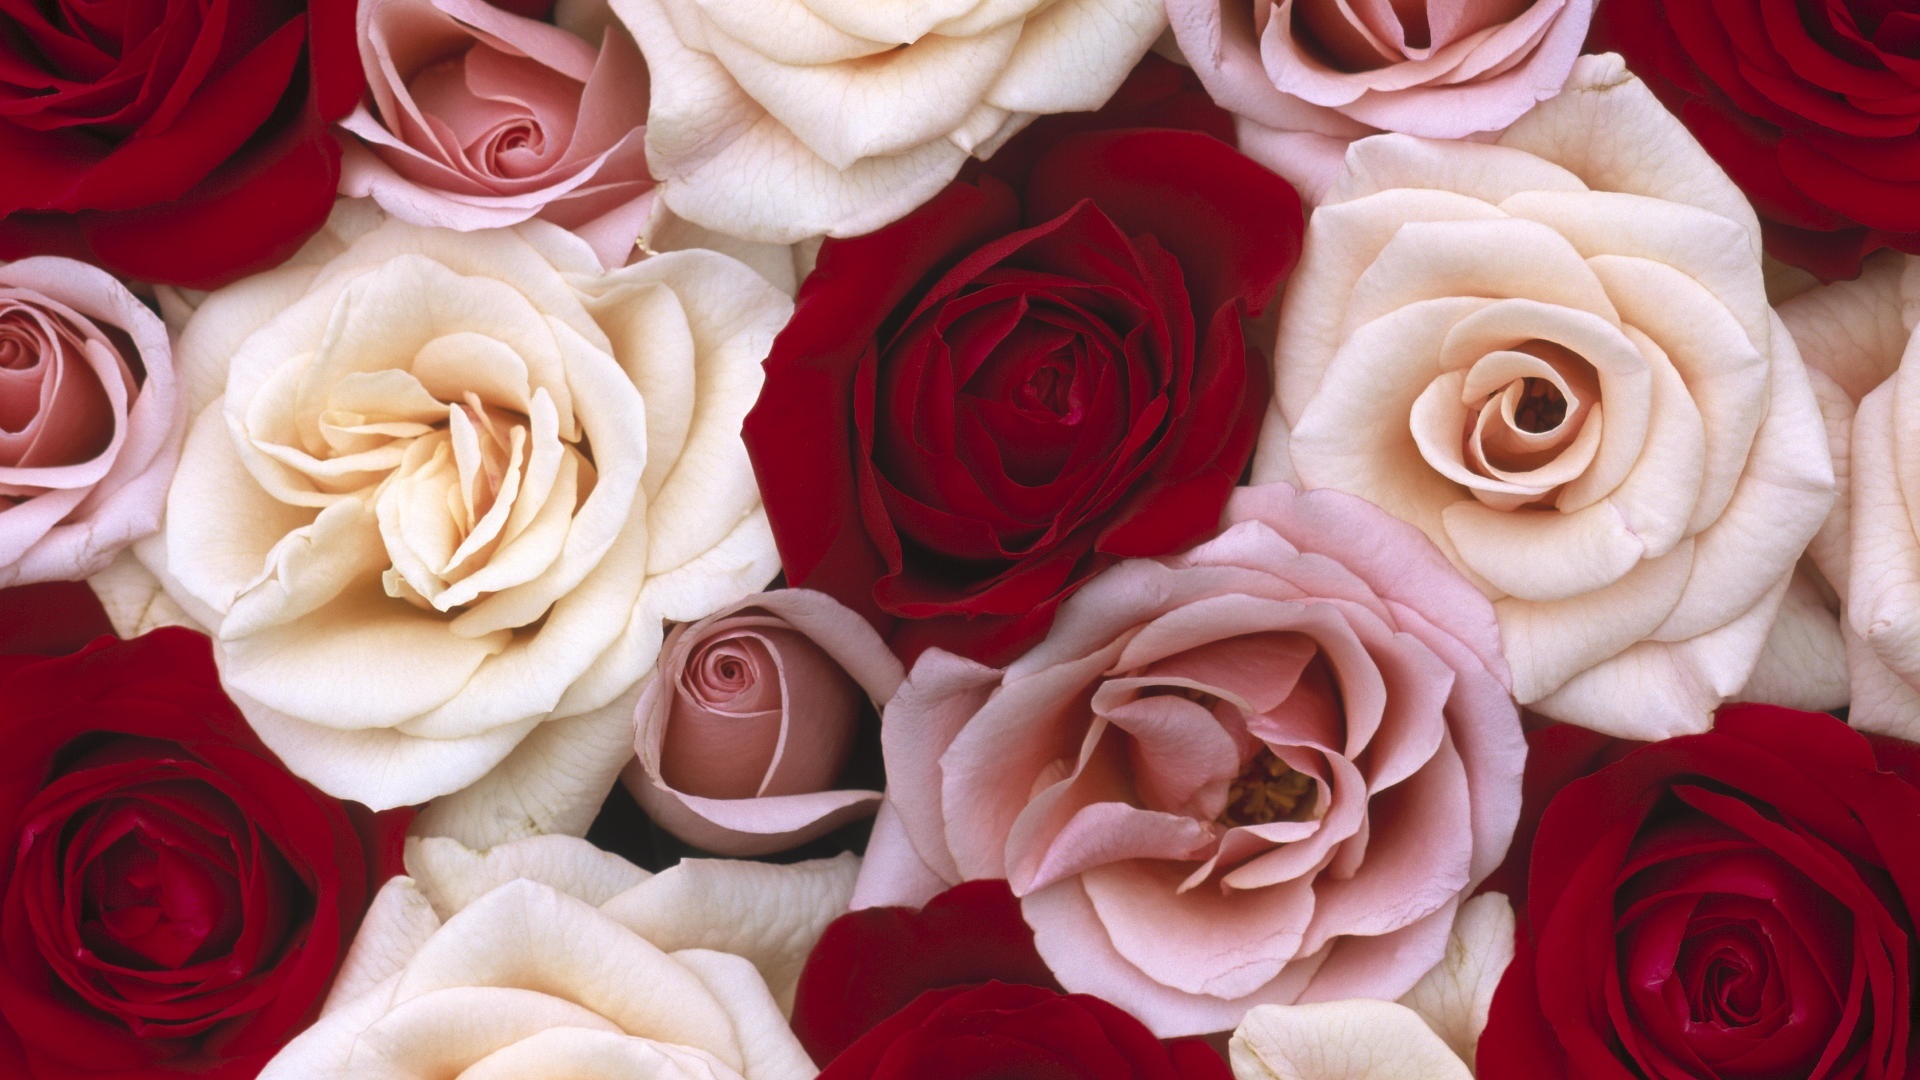 Red and white roses Wallpapers - 1920x1080 - 412865